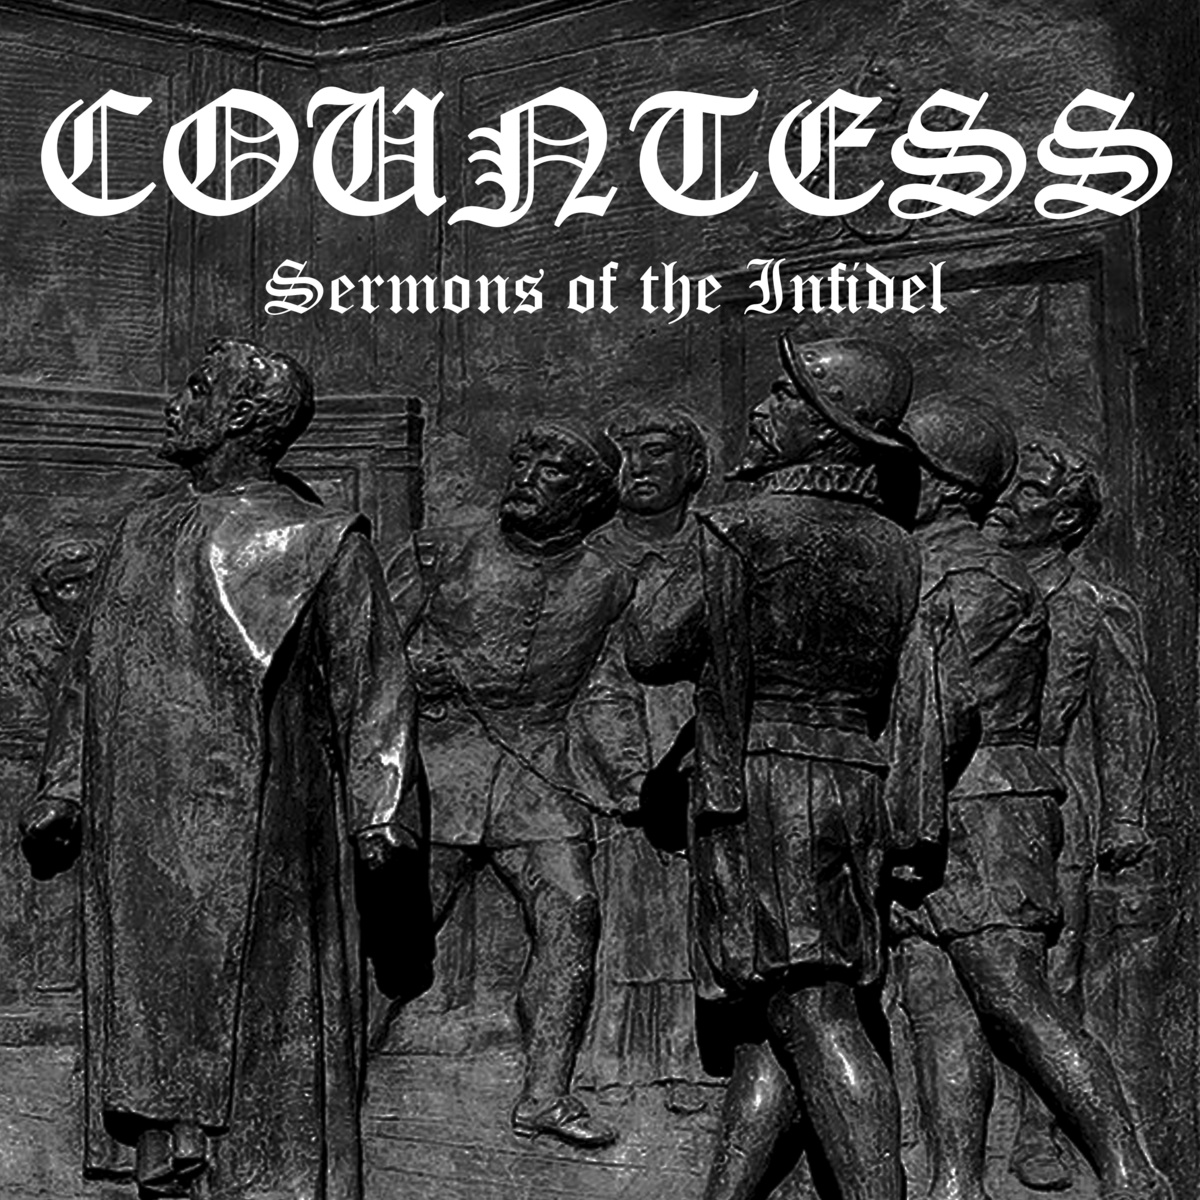 Countess – Sermons of the Infidel (heruitgave)